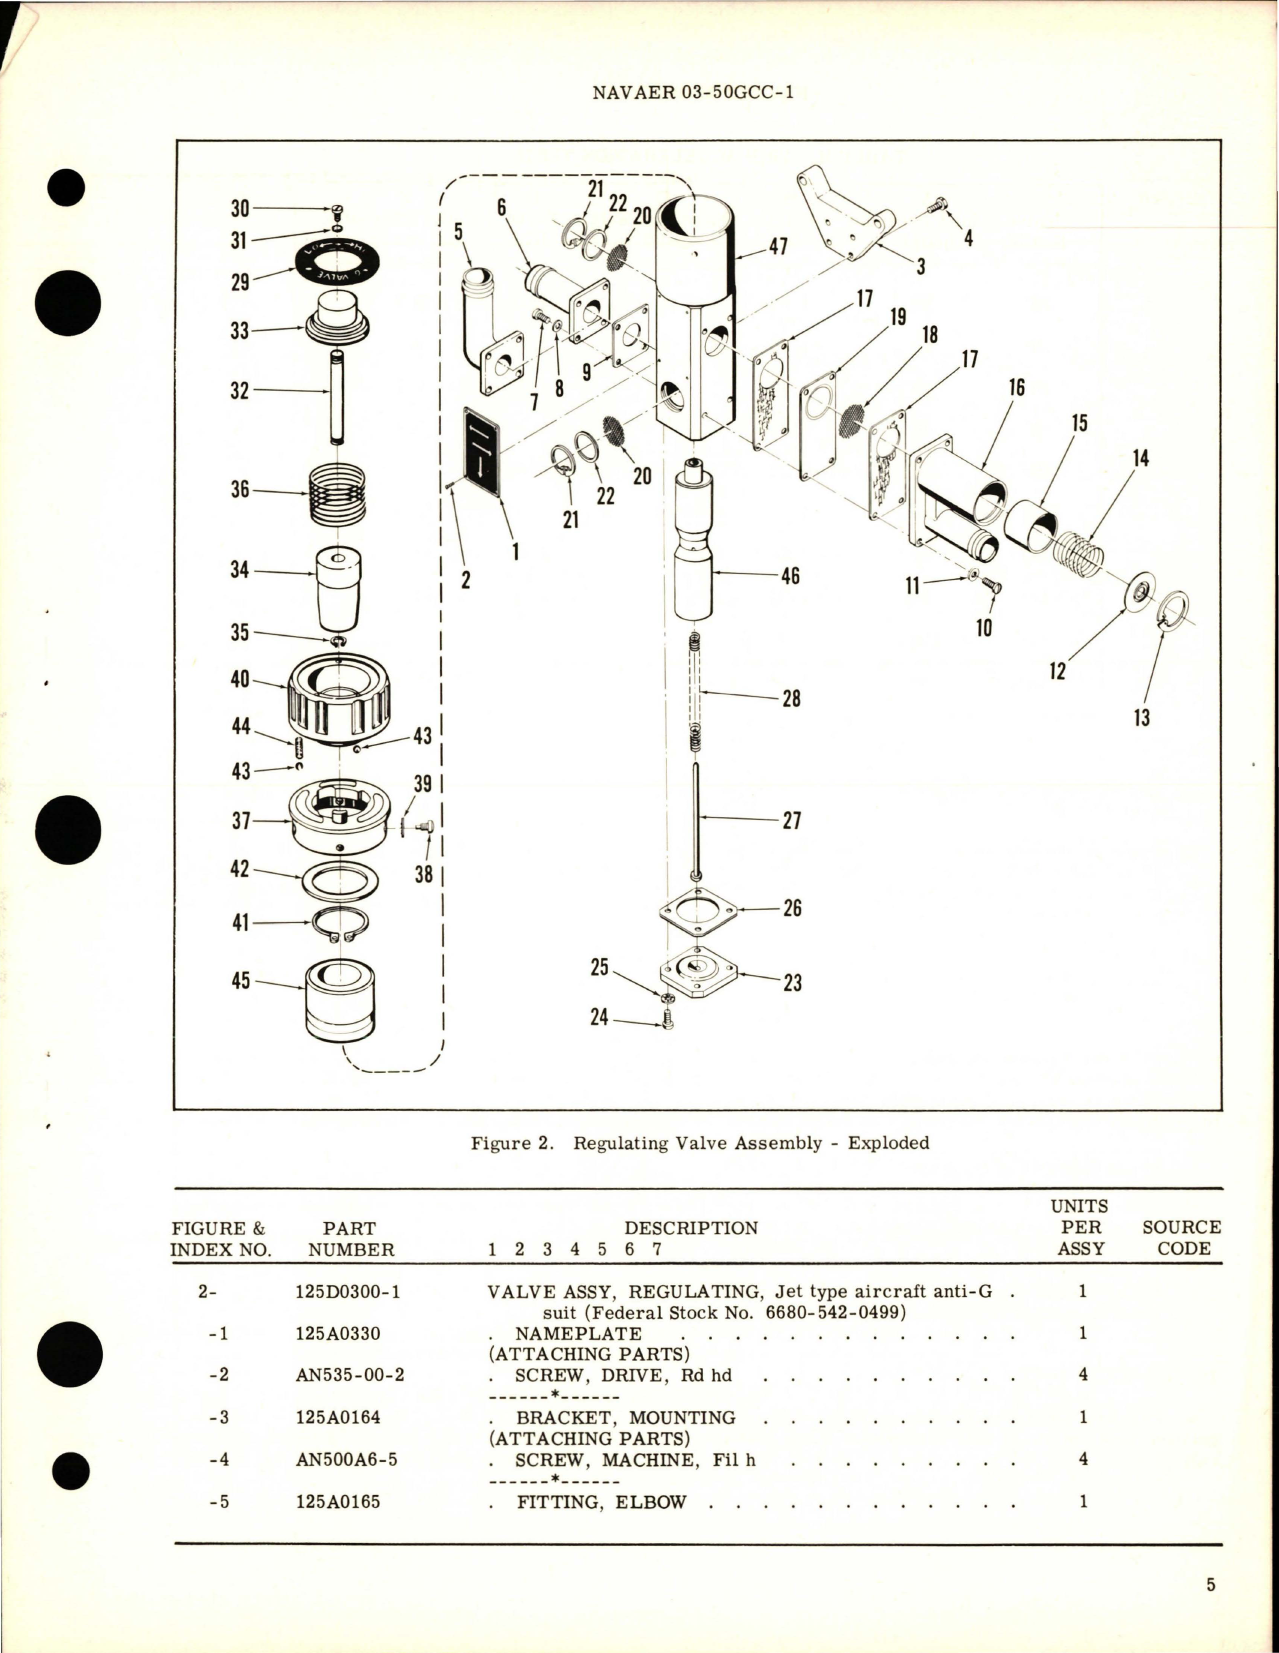 Sample page 5 from AirCorps Library document: Overhaul Instructions with Parts Breakdown for Regulating Valve Assembly - Part 125D0300-1 